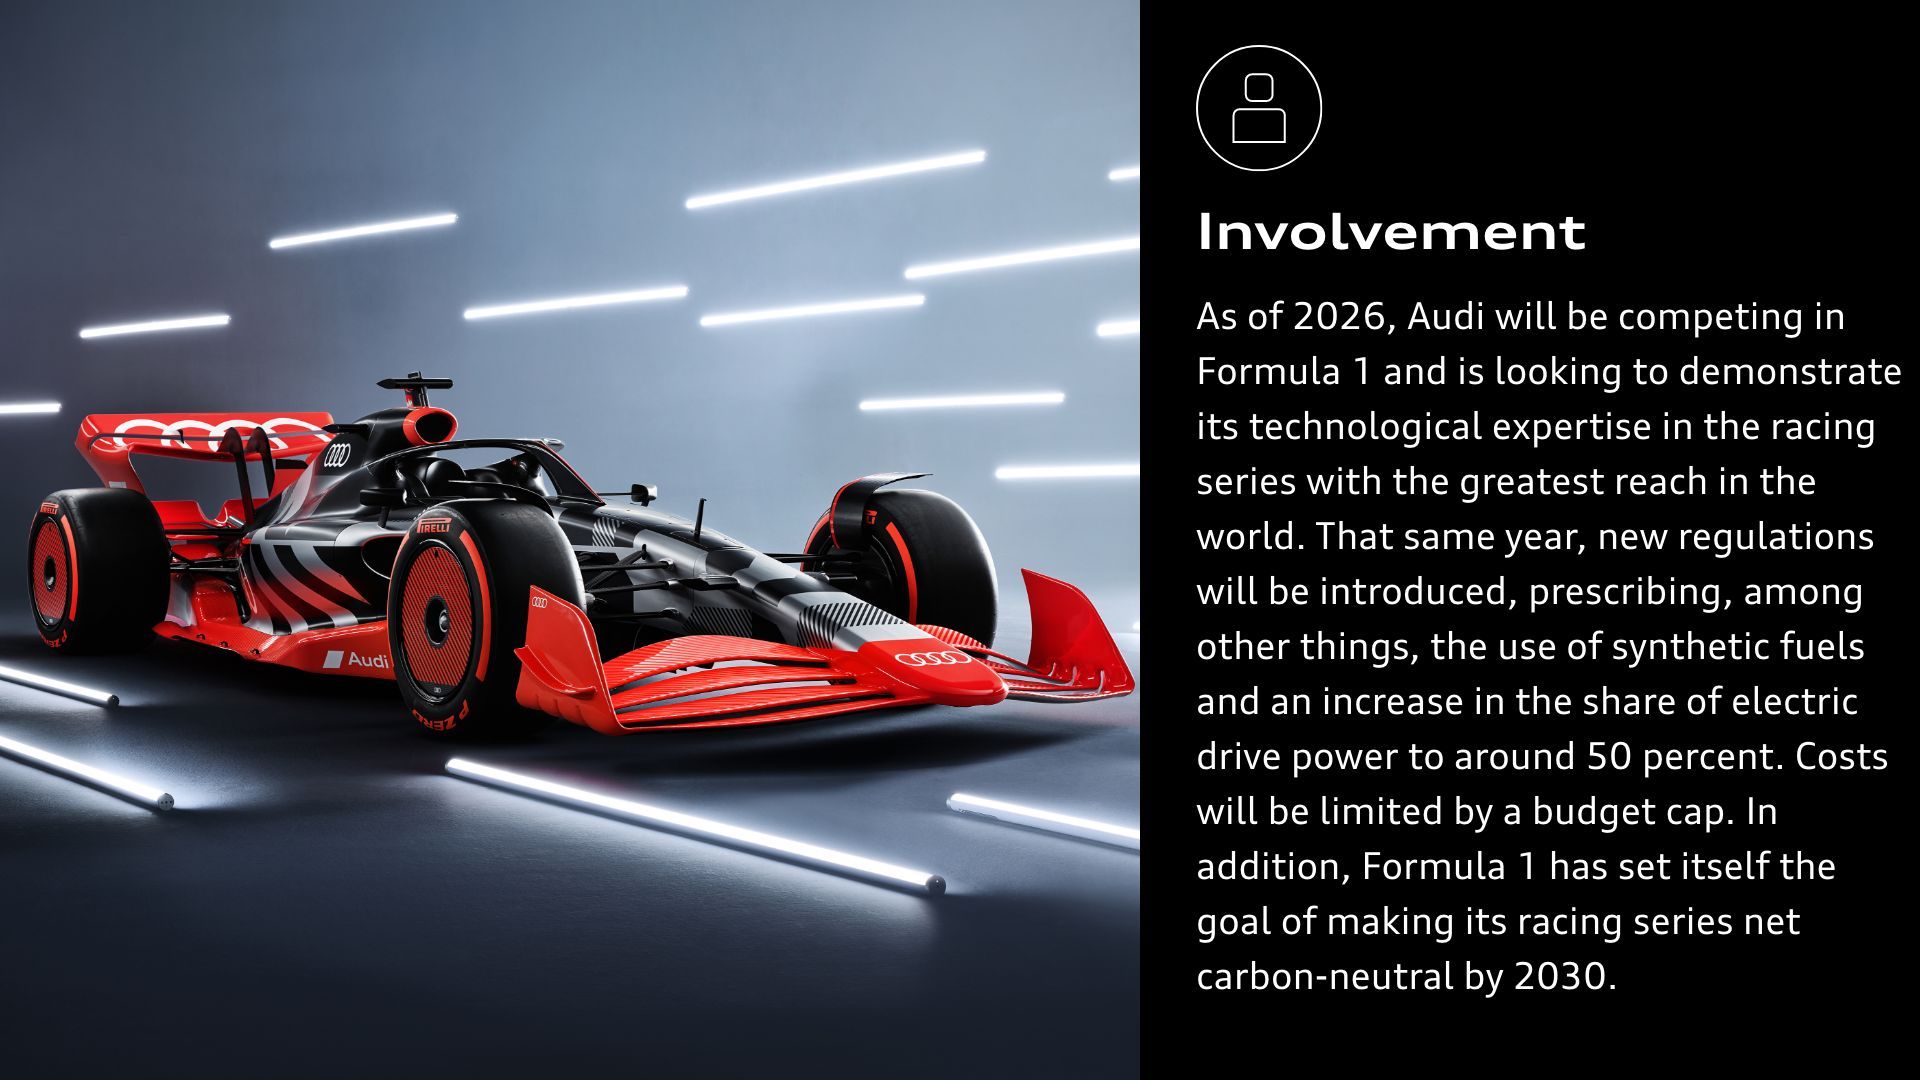 Involvement: As of 2026, Audi will be competing in Formula 1 and is looking to demonstrate its technological expertise in the racing series with the greatest reach in the world. That same year, new regulations will be introduced, prescribing, among other things, the use of synthetic fuels and an increase in the share of electric drive power to around 50 percent. Costs will be limited by a budget cap. In addition, Formula 1 has set itself the goal of making its racing series net carbon-neutral by 2030.